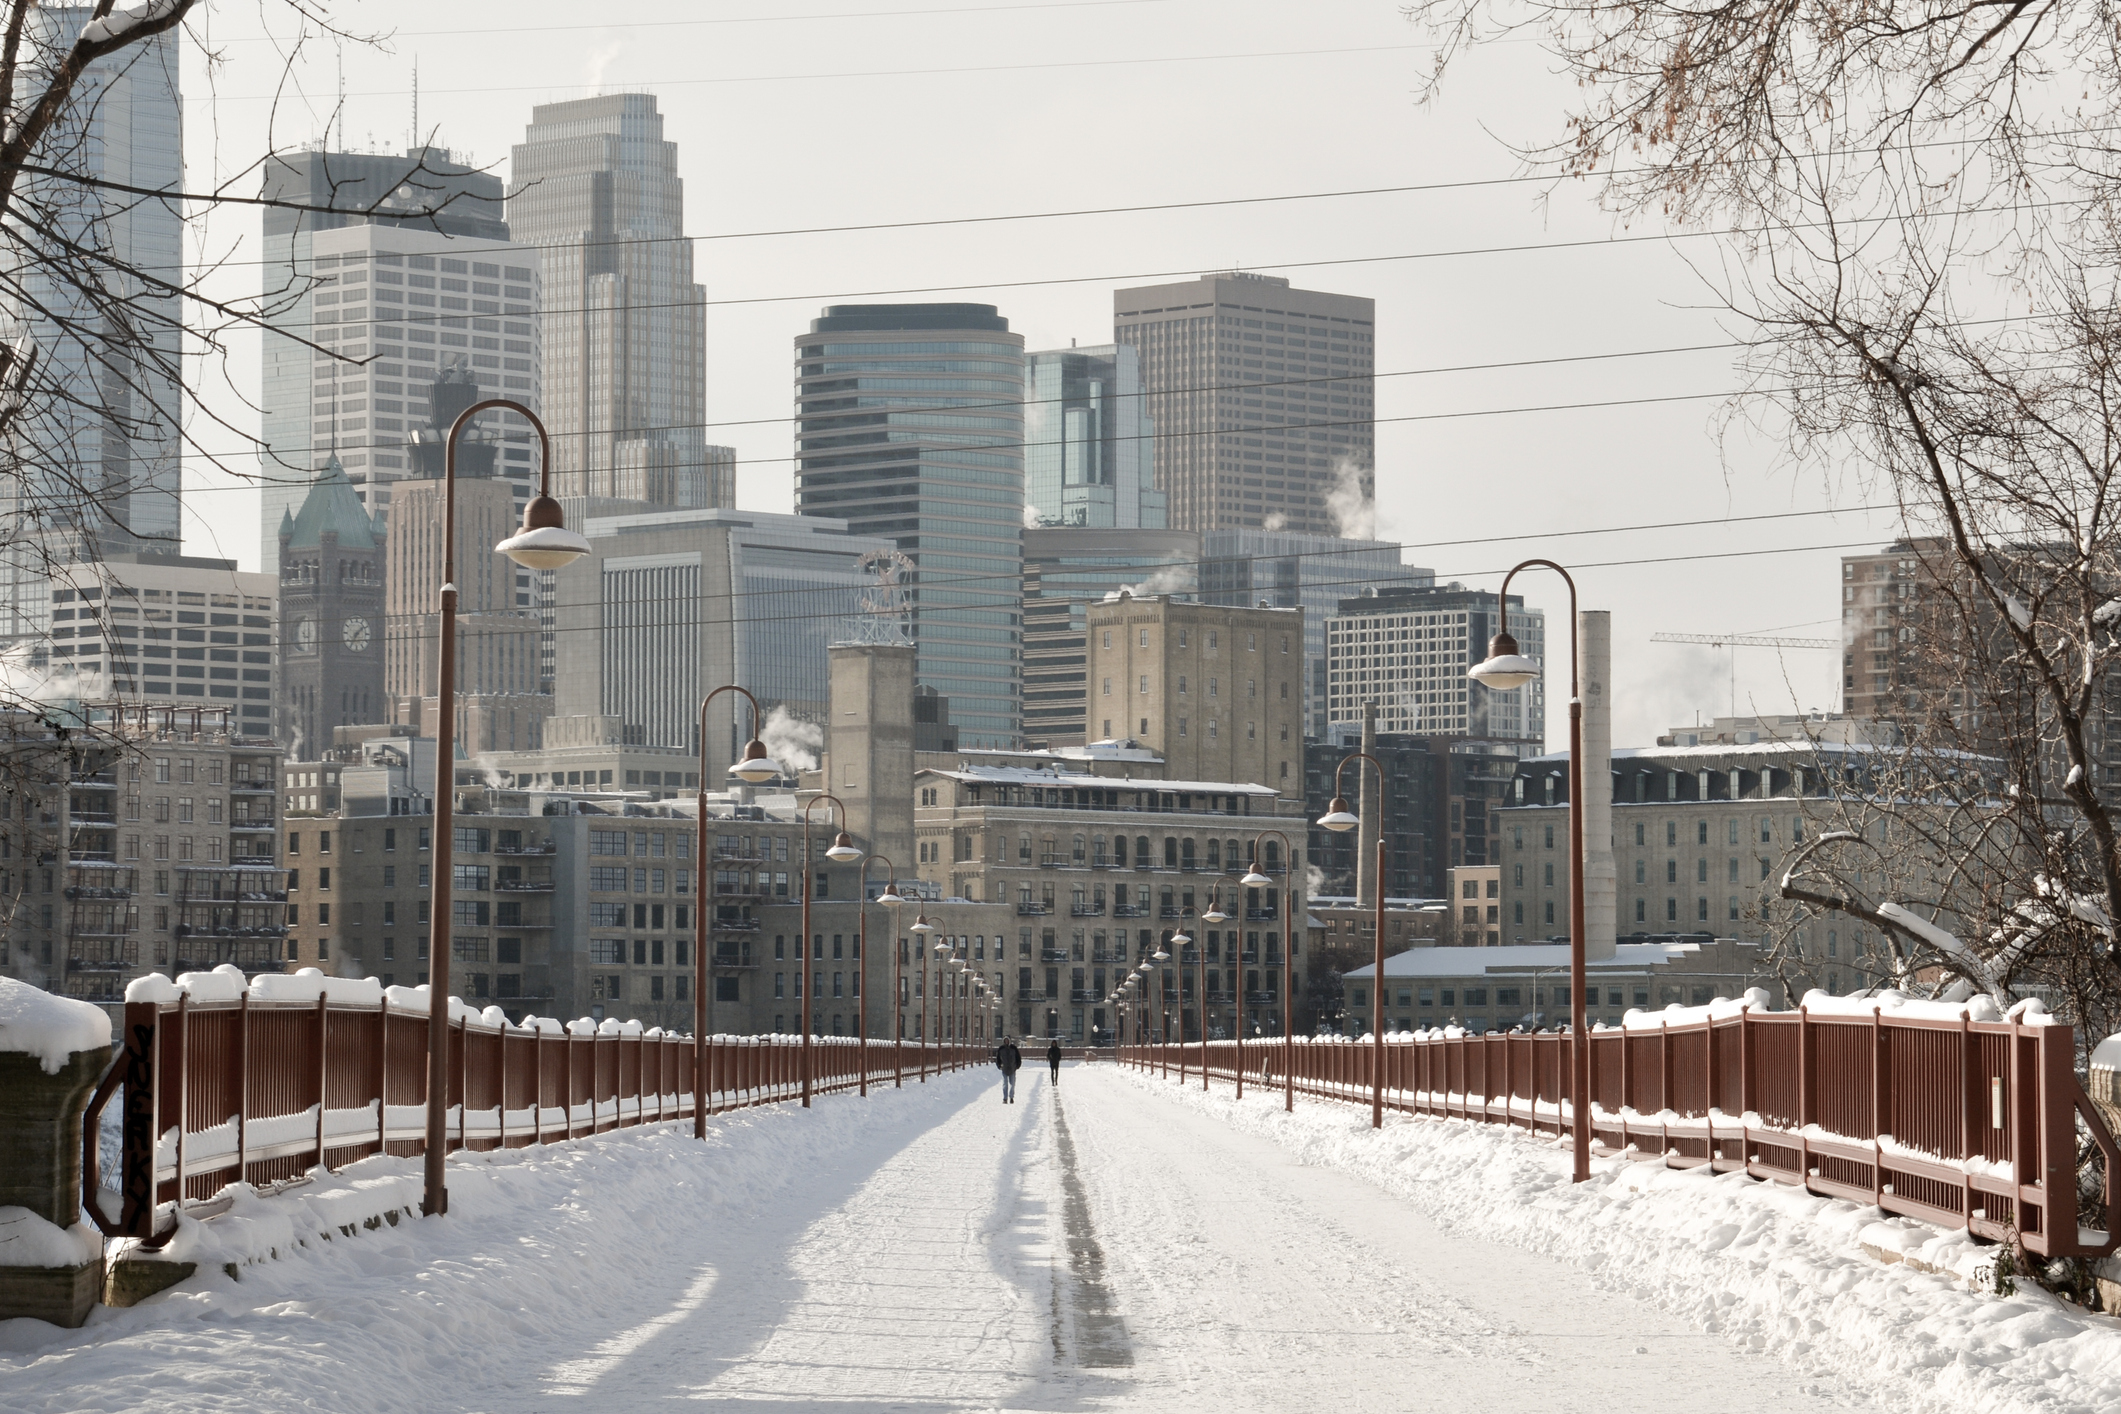 Survey shows what people think about Minneapolis